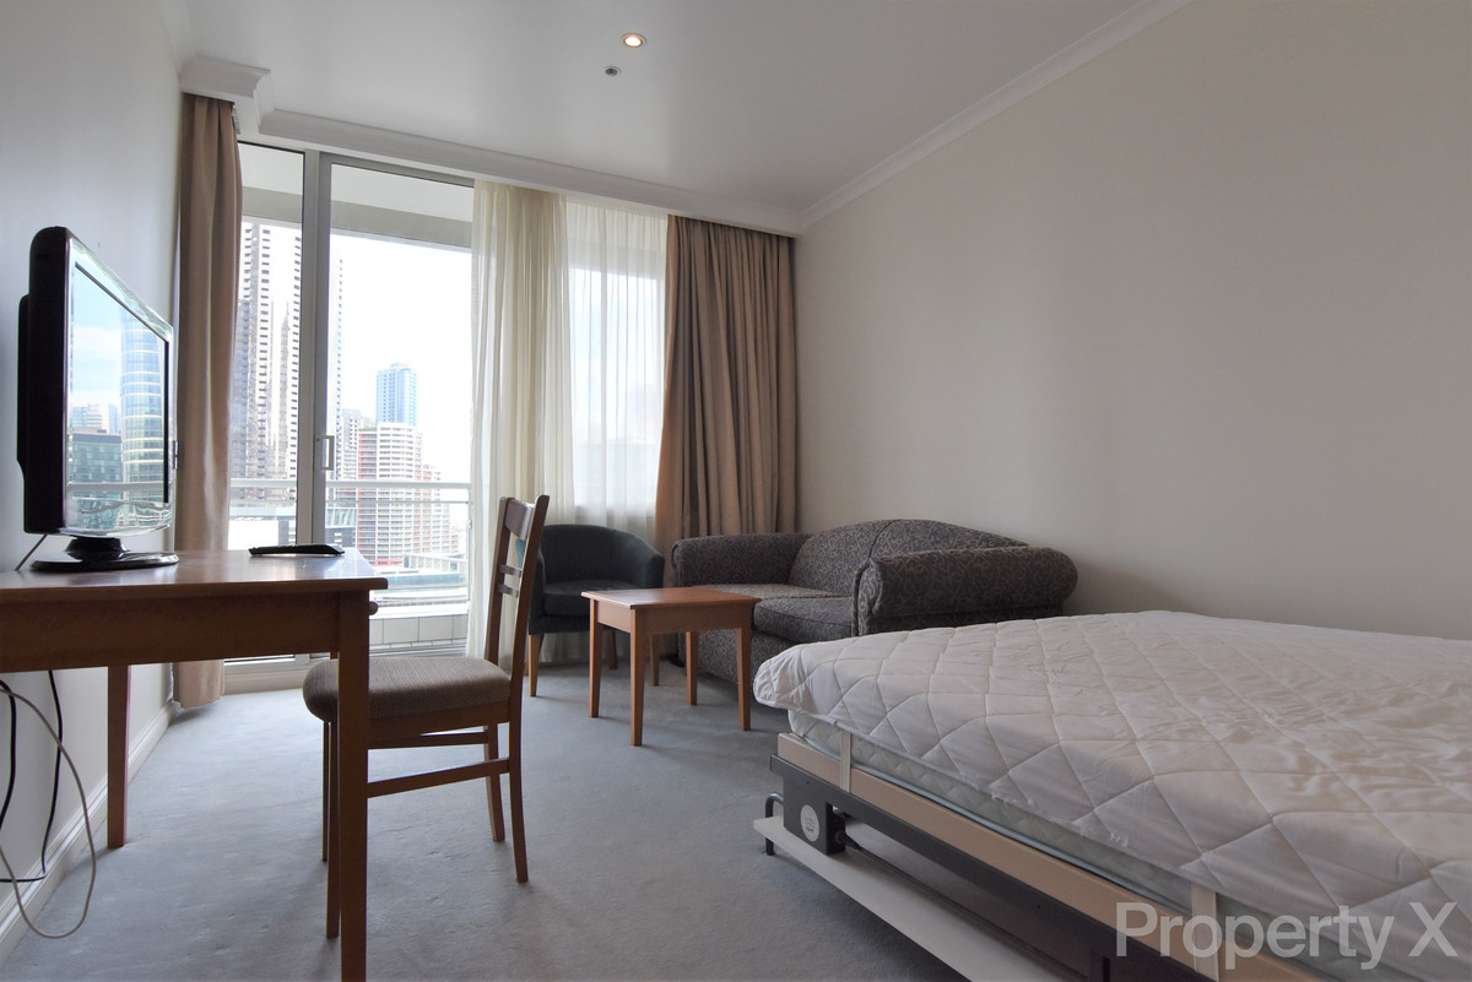 Main view of Homely studio listing, 1232 1 William Street, Melbourne VIC 3000